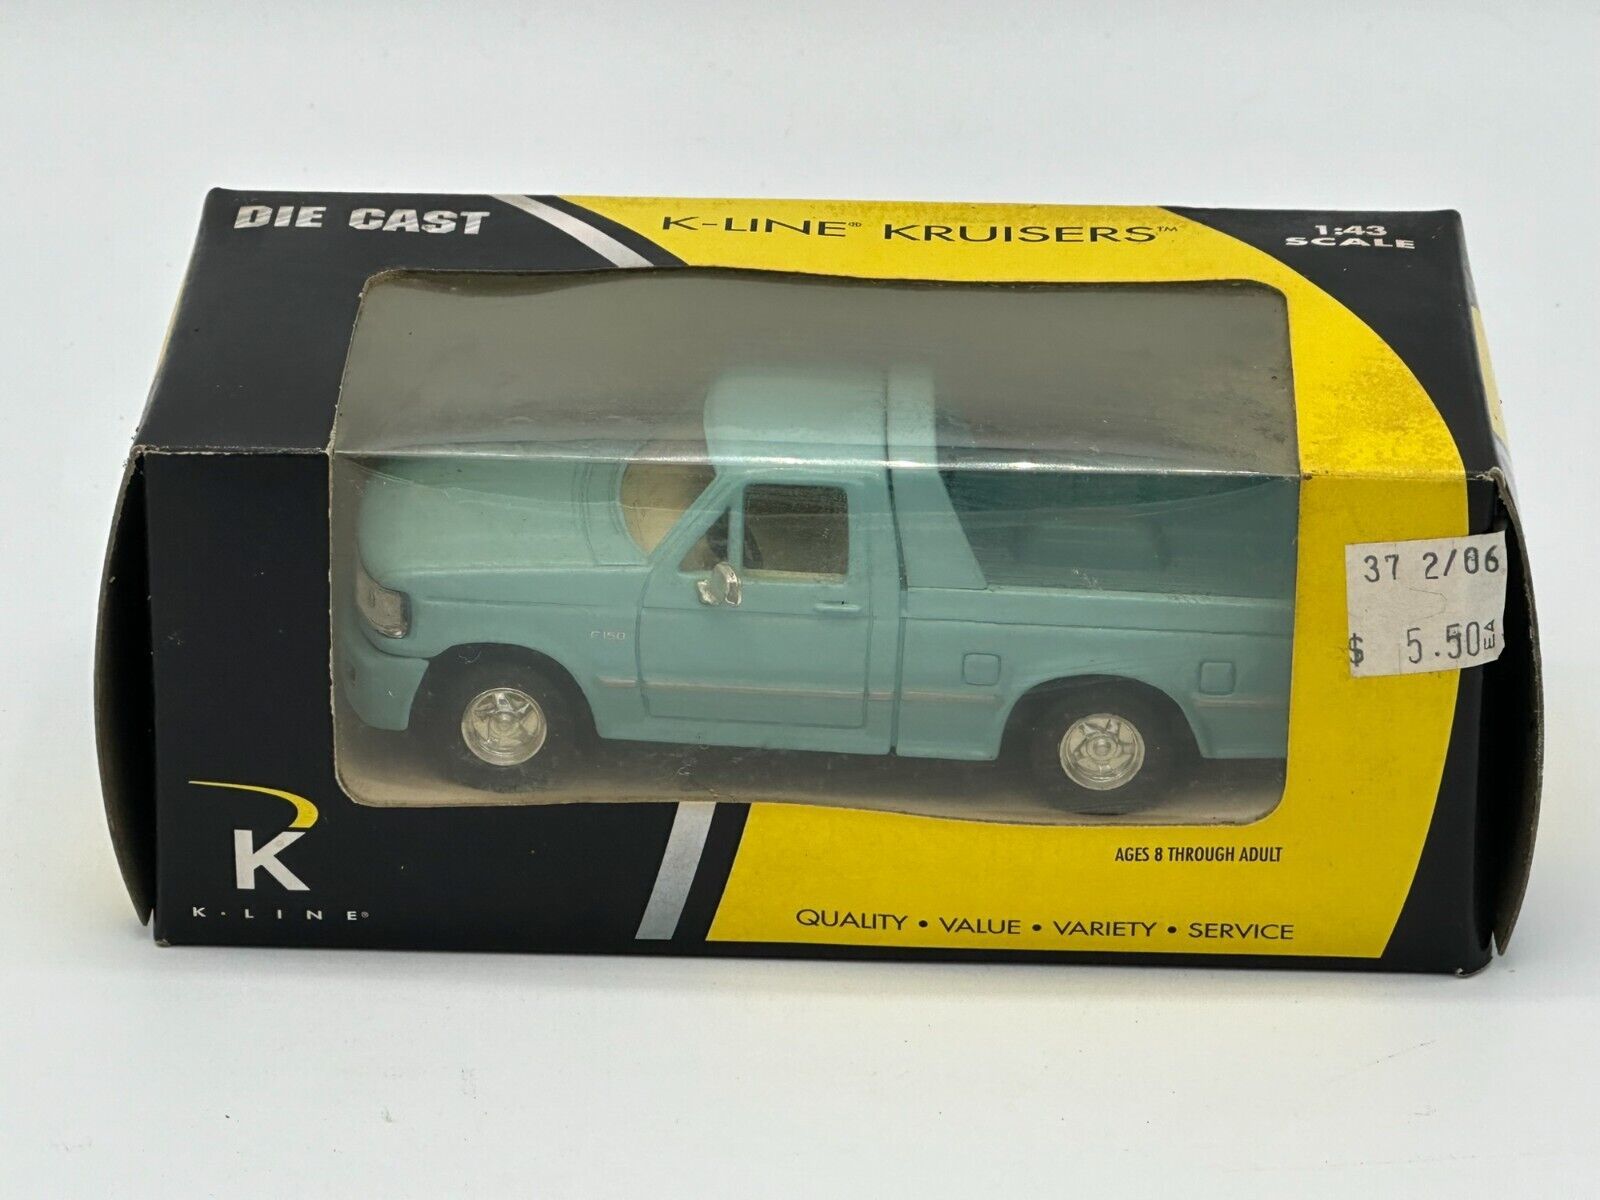 K-Line K-94205 95 Ford F-150 Pick-up O-Scale 1:43 Lionel Die Cast - $14.84